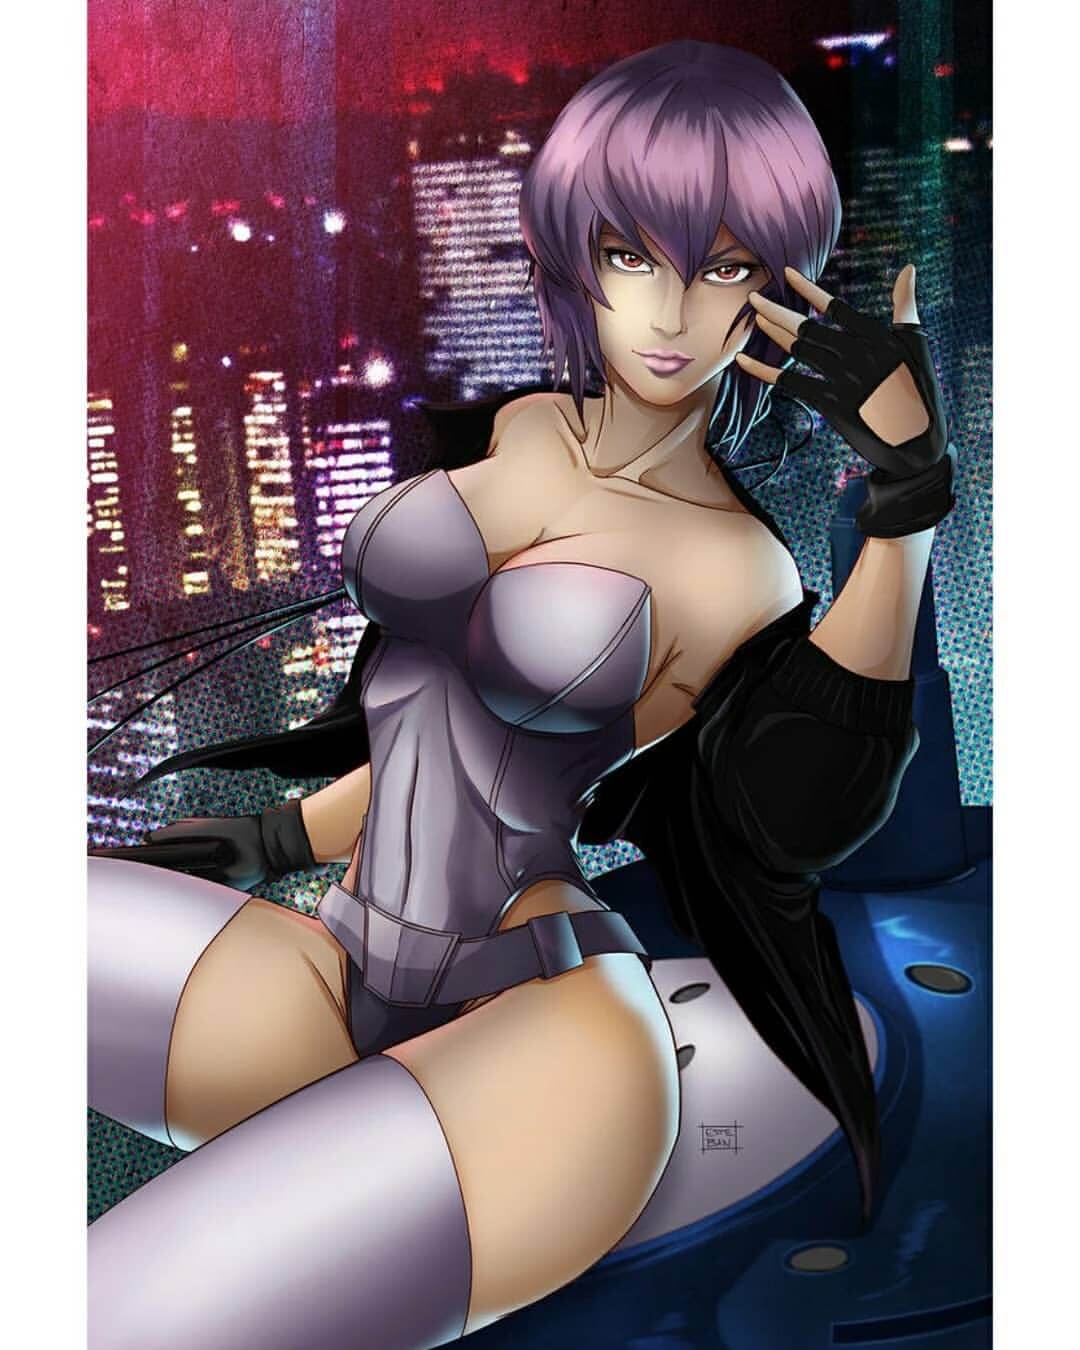 49 Hot Pictures Of Major Motoko Kusanagi From Ghost In The Shell Show That Her Body Is A Sexy Art | Best Of Comic Books